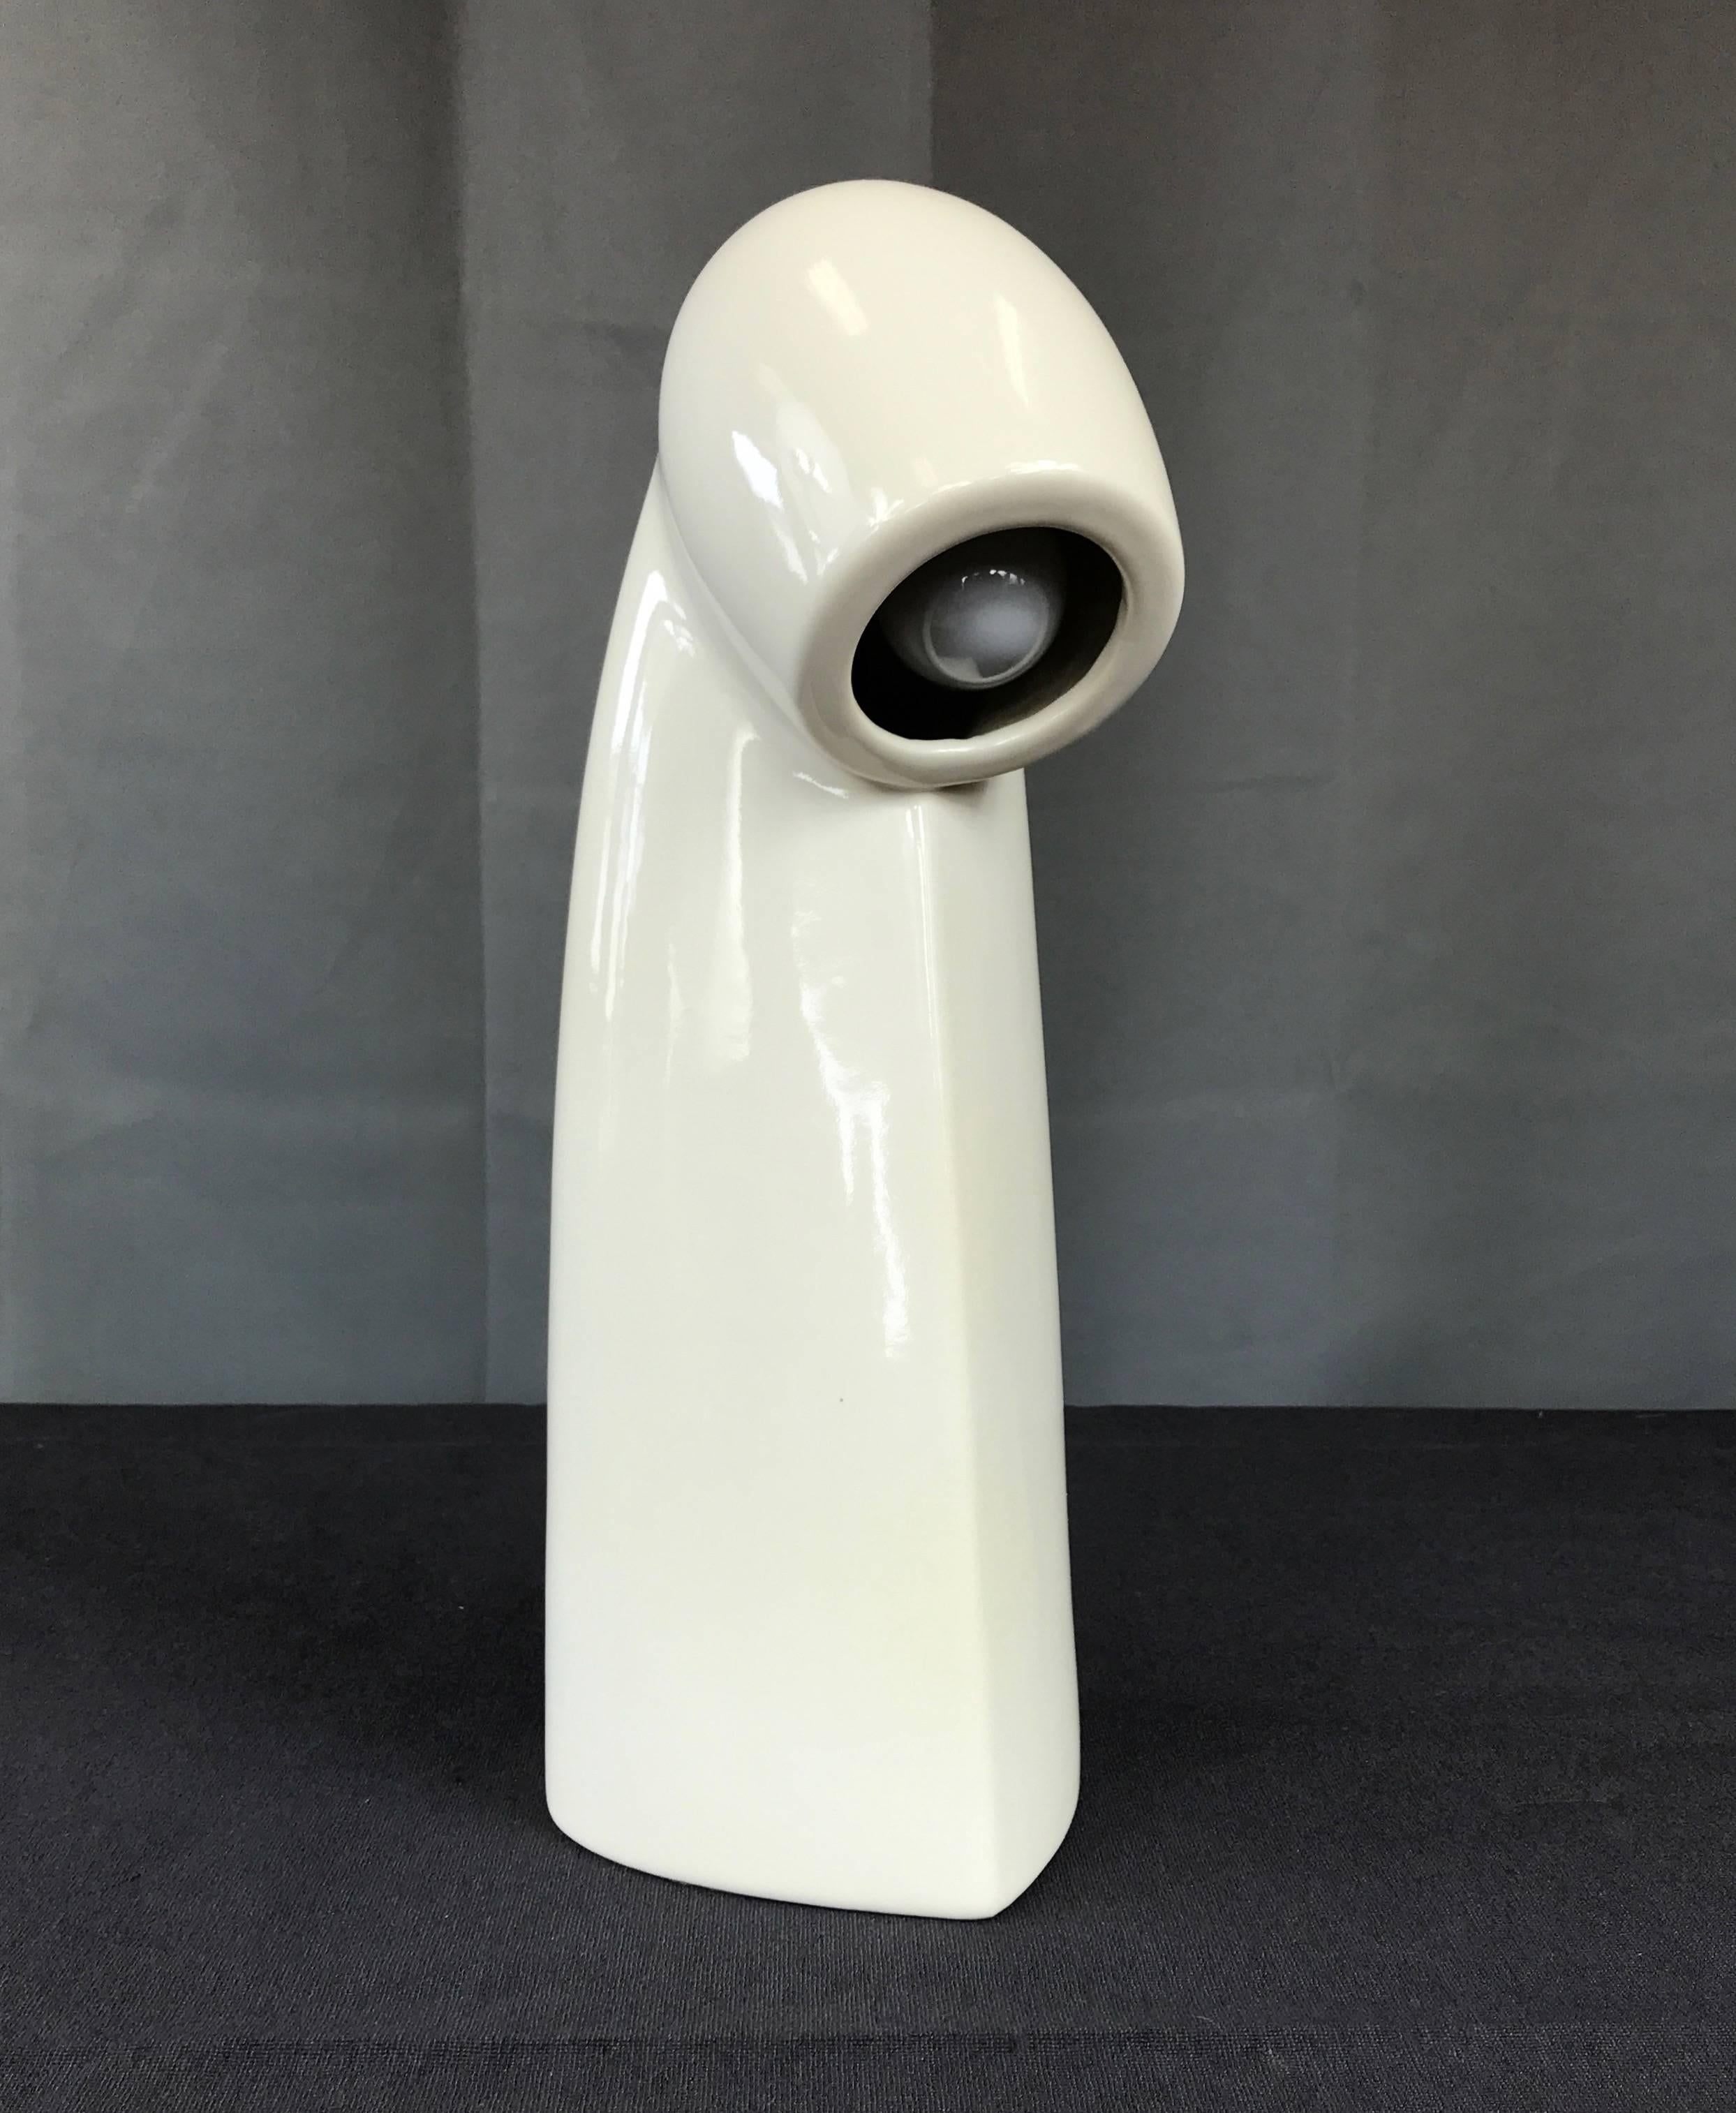 A vintage ceramic table or desk lamp done in the style of Gino Vistosi.

A sleek Mid-Century mix of mod and Space Age that would look right at home in a contemporary interior. Whether calling to mind a periscope, cloaked figure, or something from